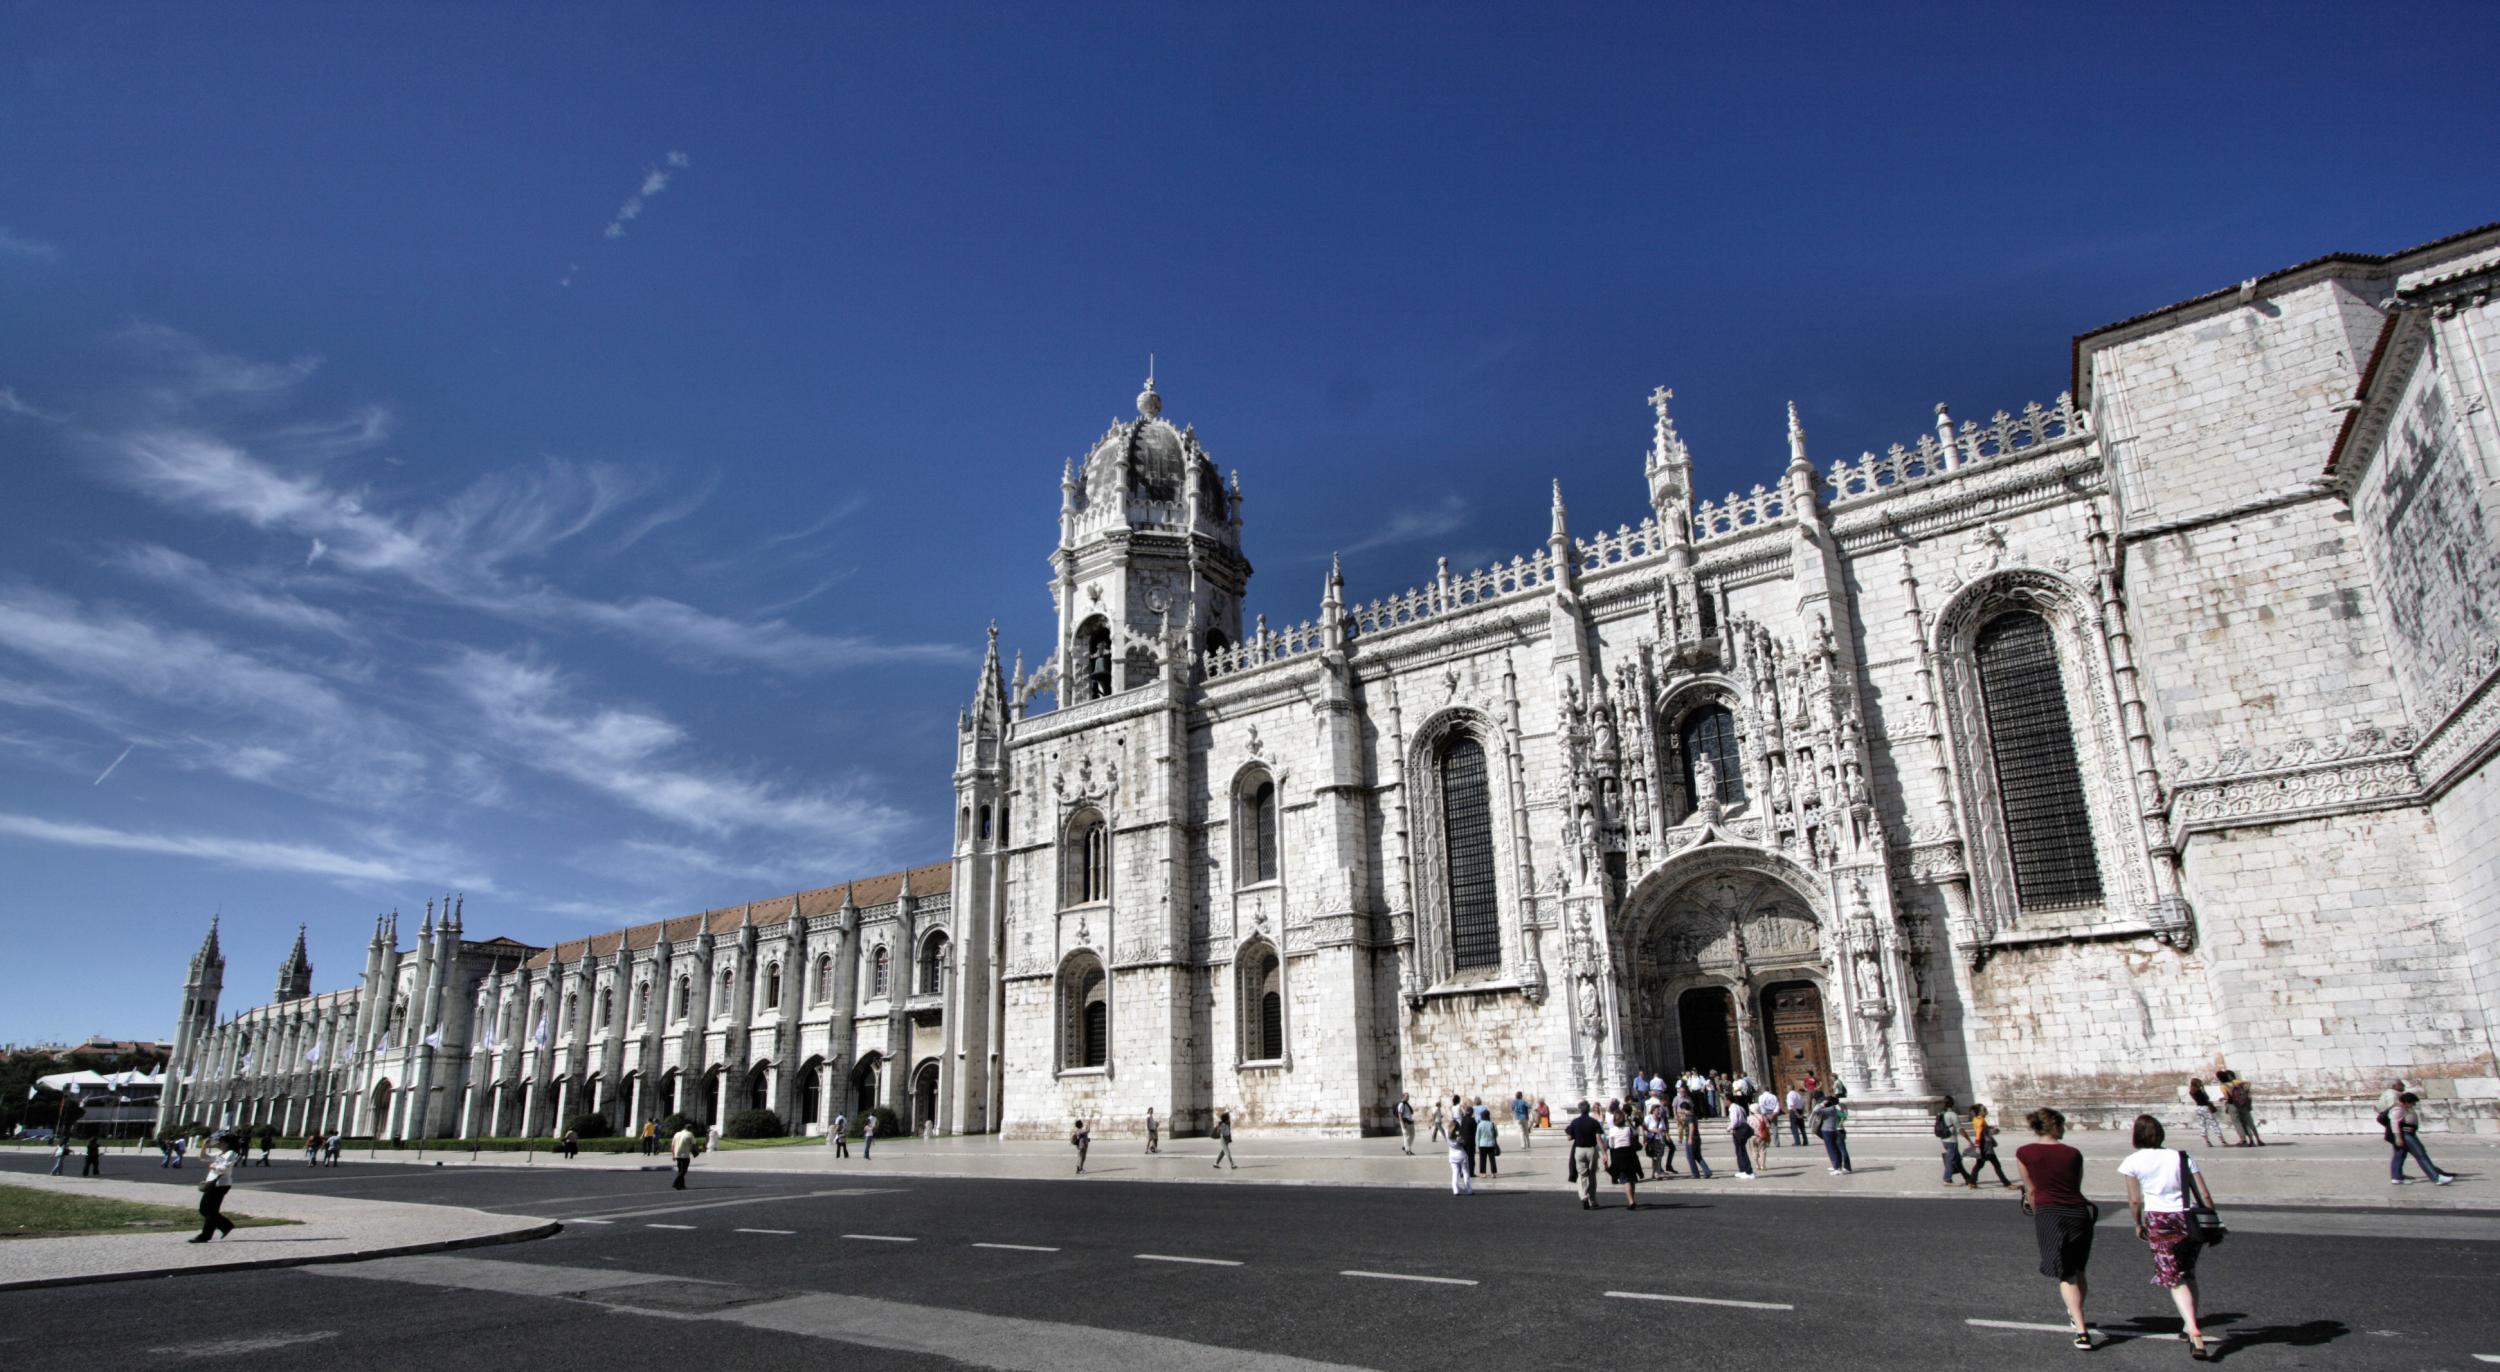 Take a trip to Jeronimos Monastery, a lavish 15th century building in the heart of Lisbon